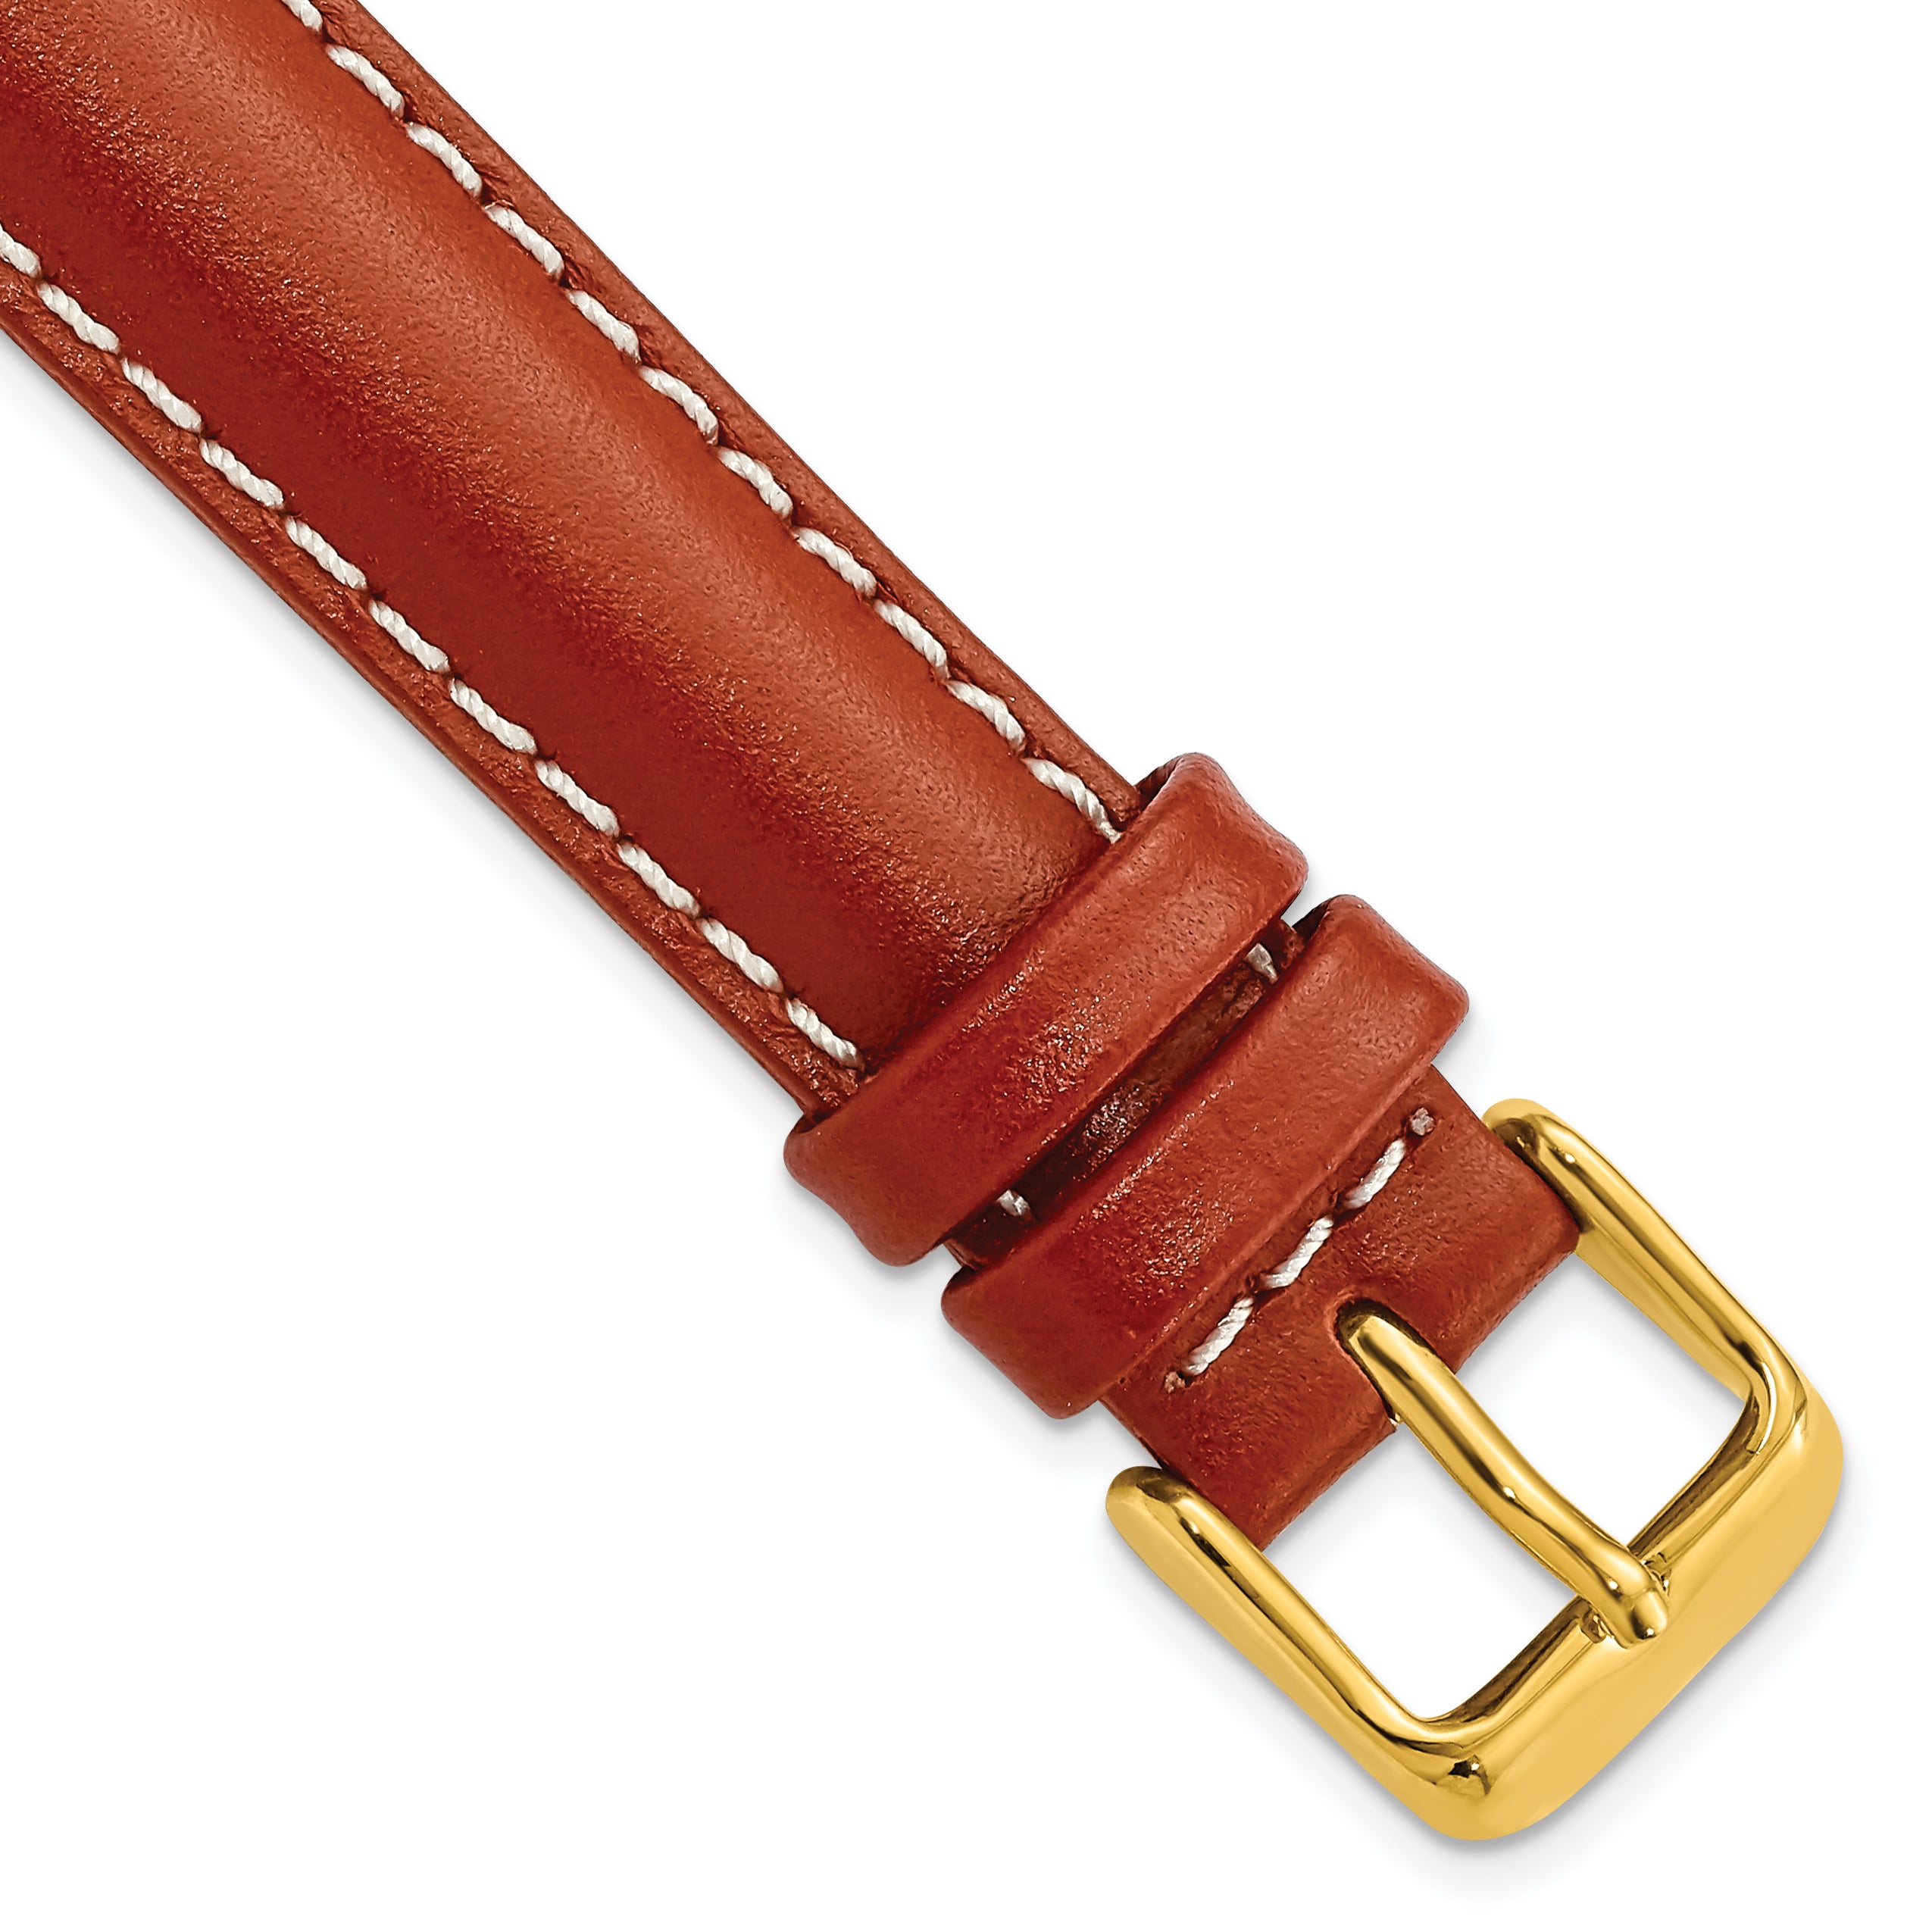 DeBeer 16mm Saddle Brown Oil-tanned Leather with White Stitching and Gold-tone Buckle 7.5 inch Watch Band